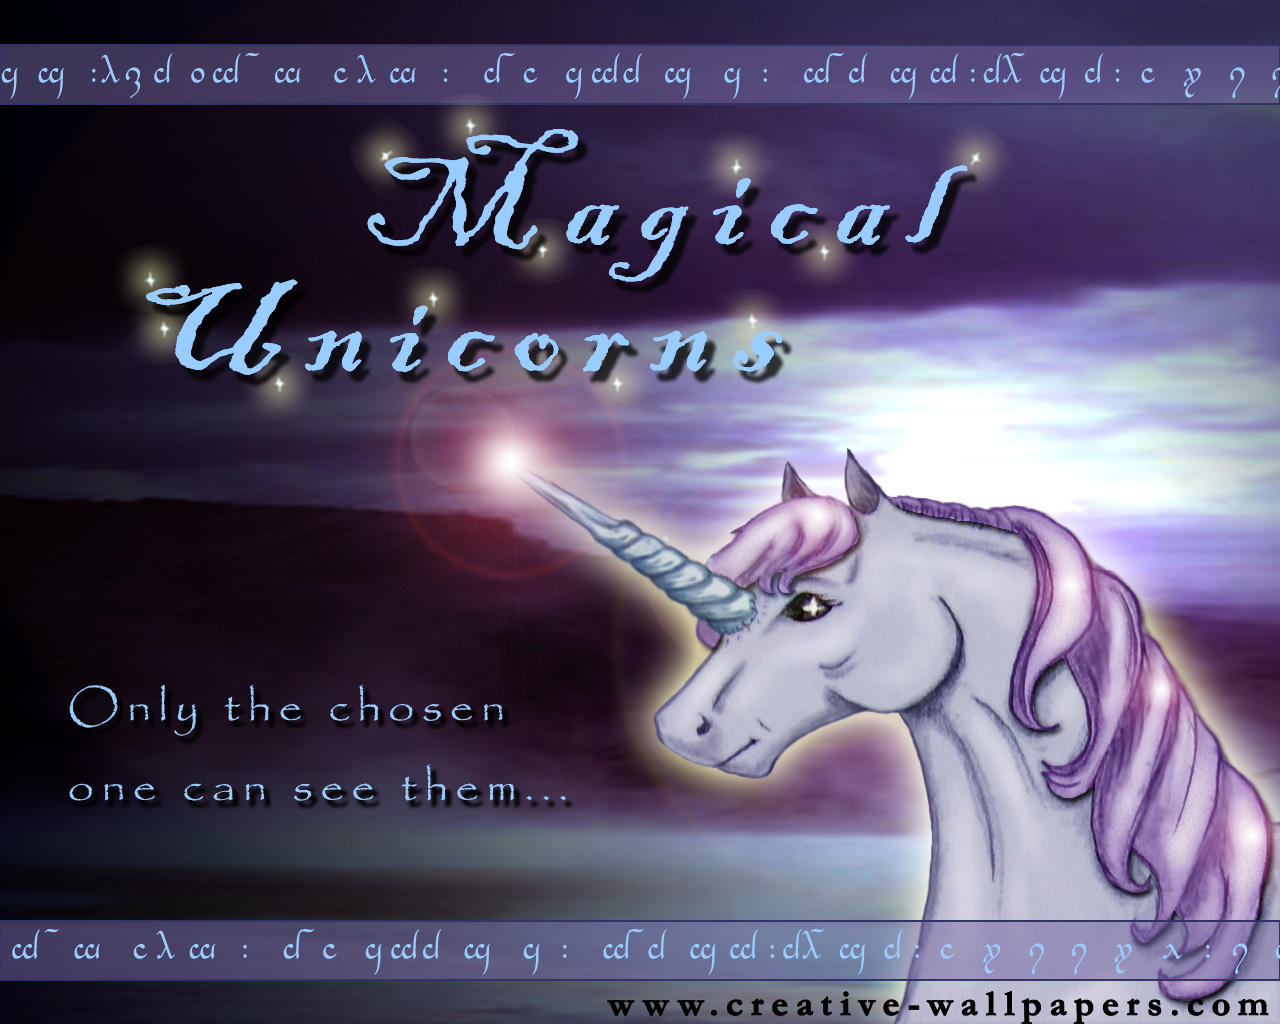 Unicorn Desktop Background From Us At Creative Wallpaper